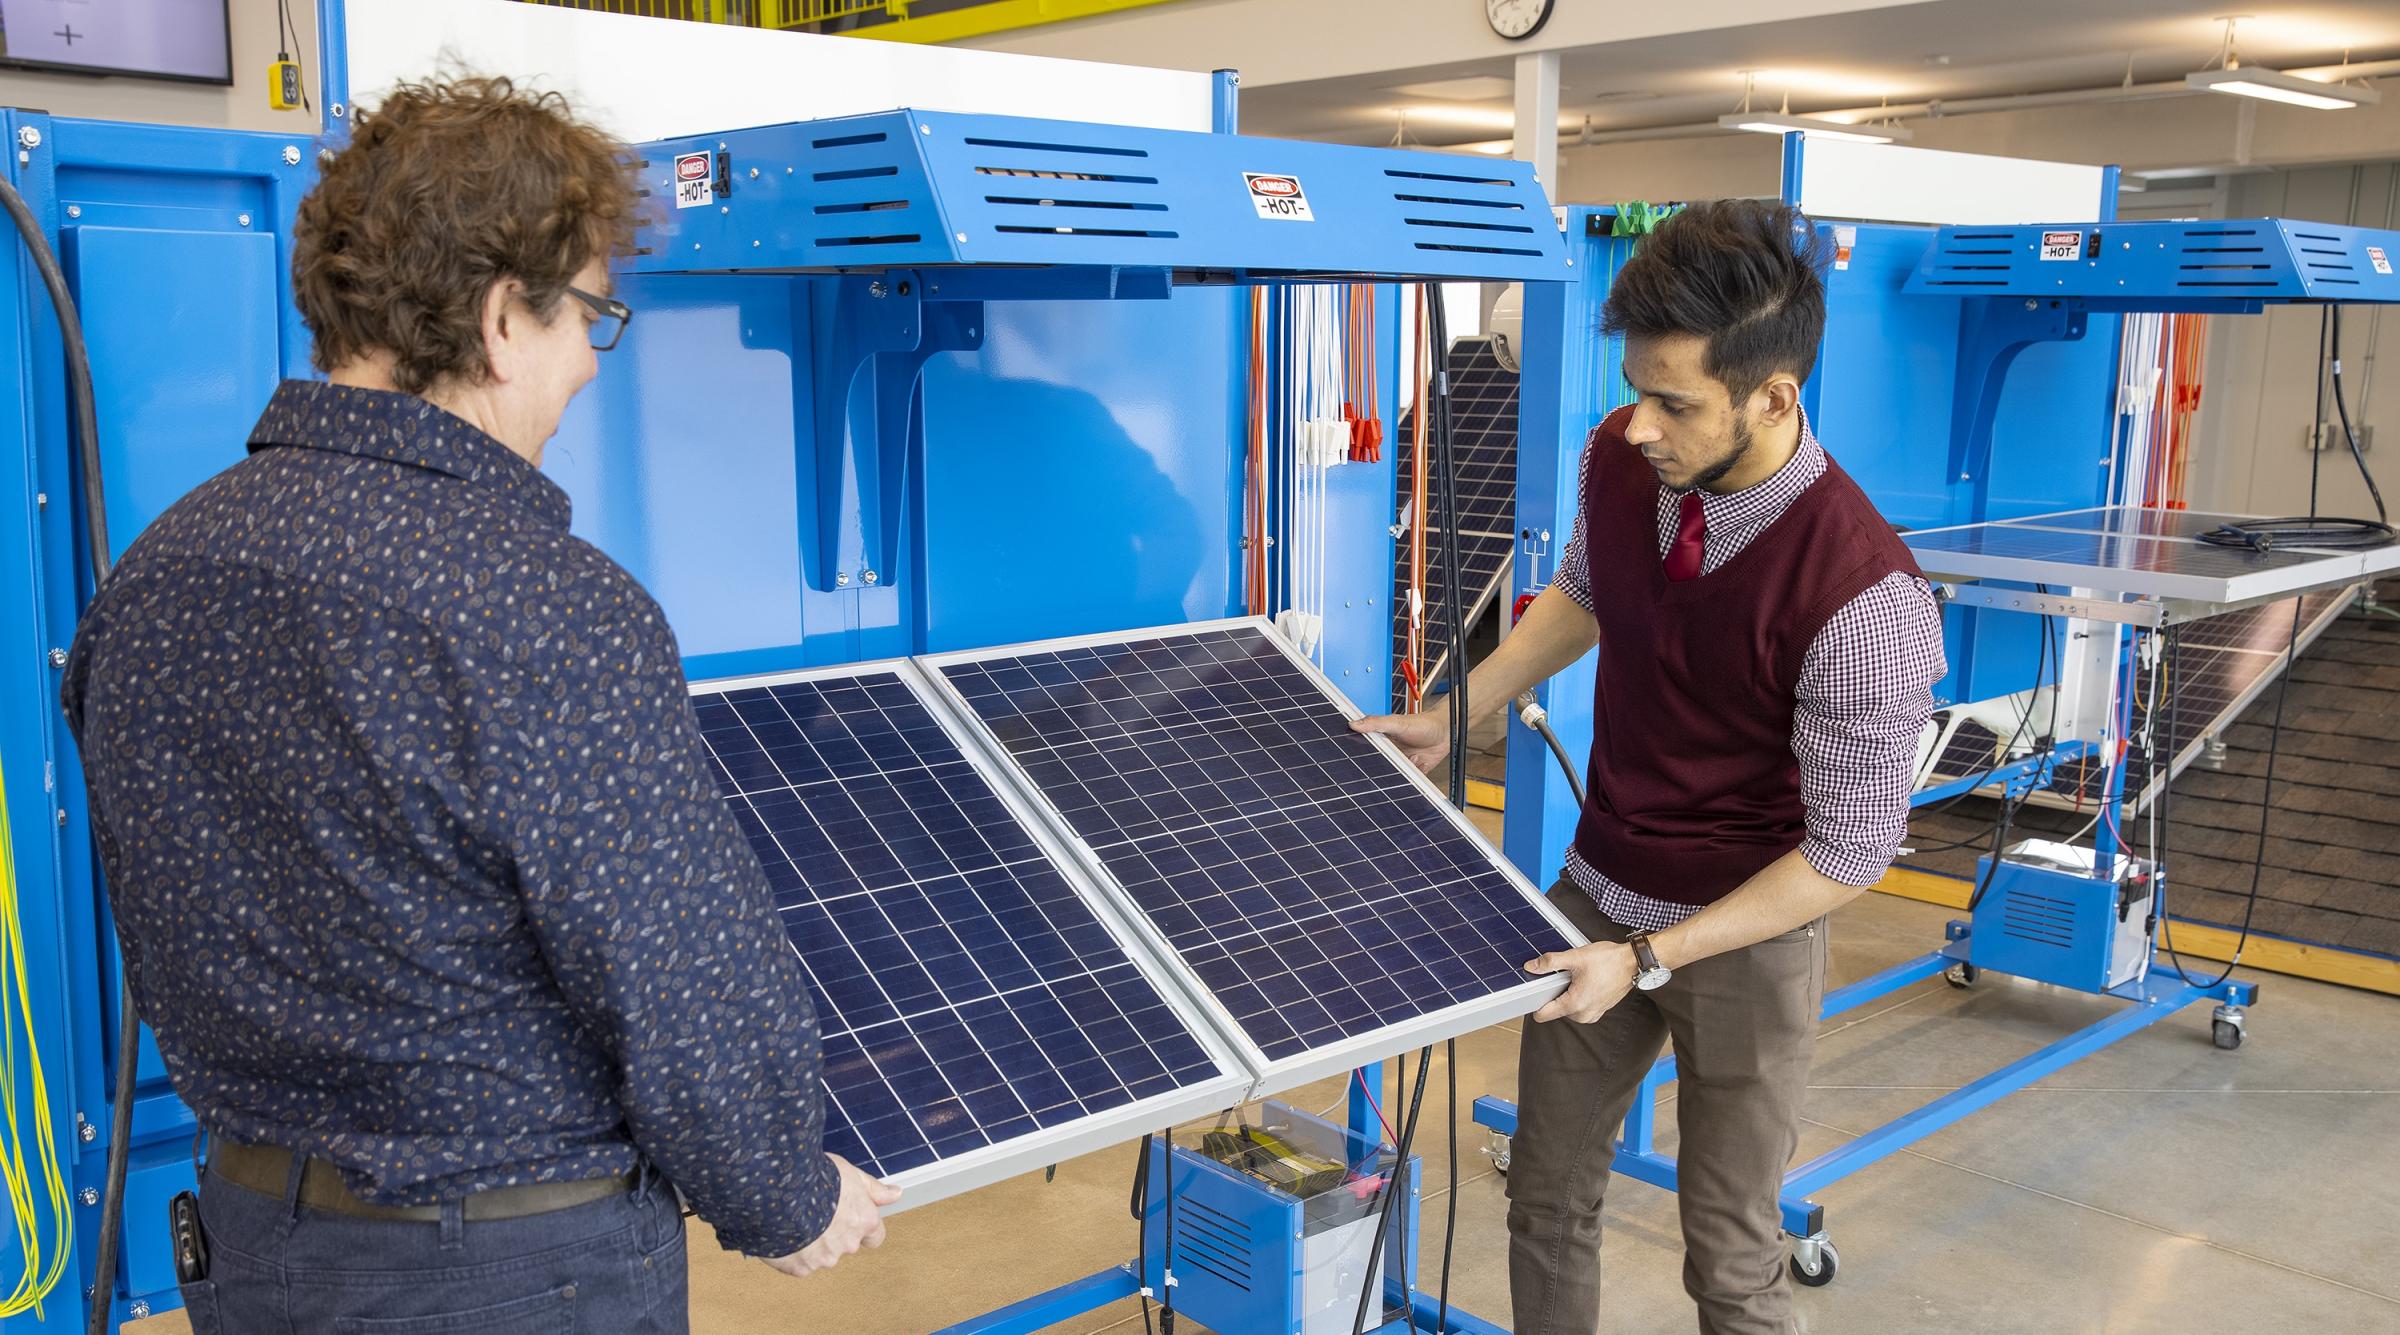 Instructor and student examining solar panel